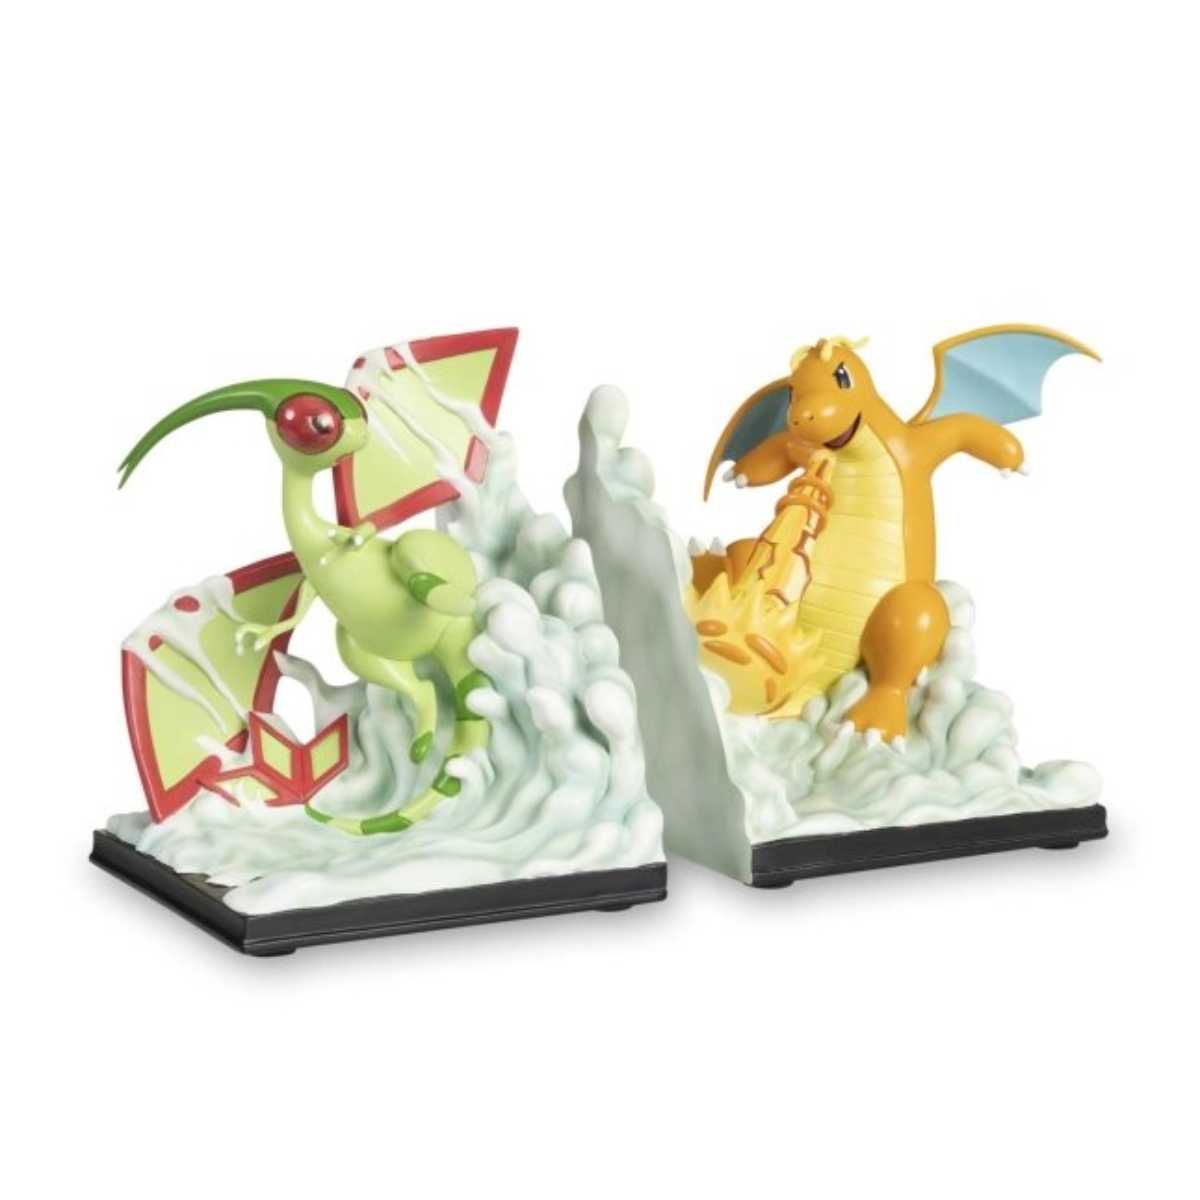 Pokemon Center Clashing Dragons Bookends "Dragonite & Flygon" (2 Pieces)-Pokemon Centre-Ace Cards & Collectibles